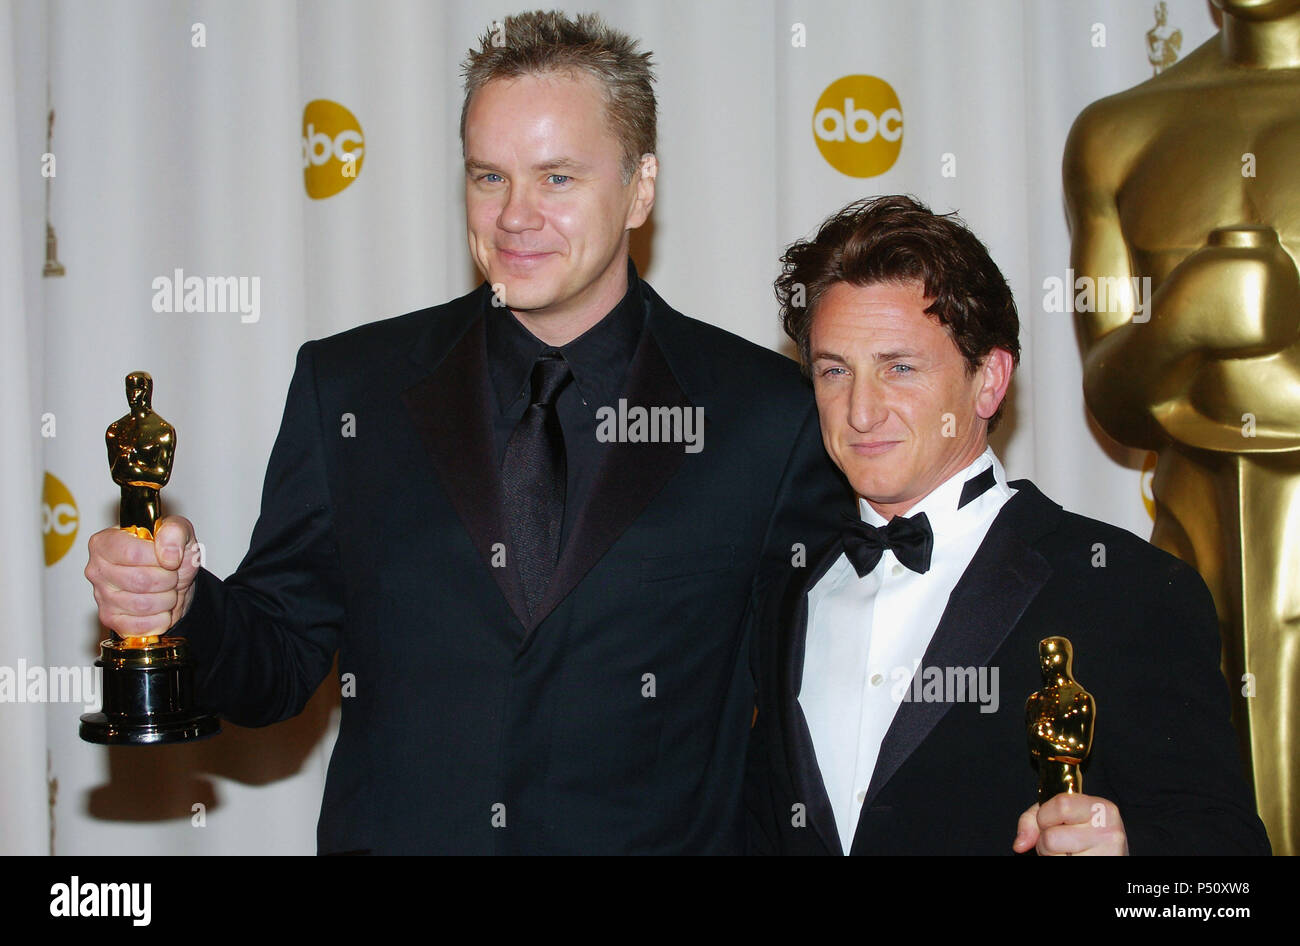 Winner Best Supporting Actor Tim Robbins and Winner Best Actor Sean Penn  backstage at the 76th Academy Awards - Oscars 2004 - at the Kodak Theatre  in Los Angeles. February 29, 2004. -